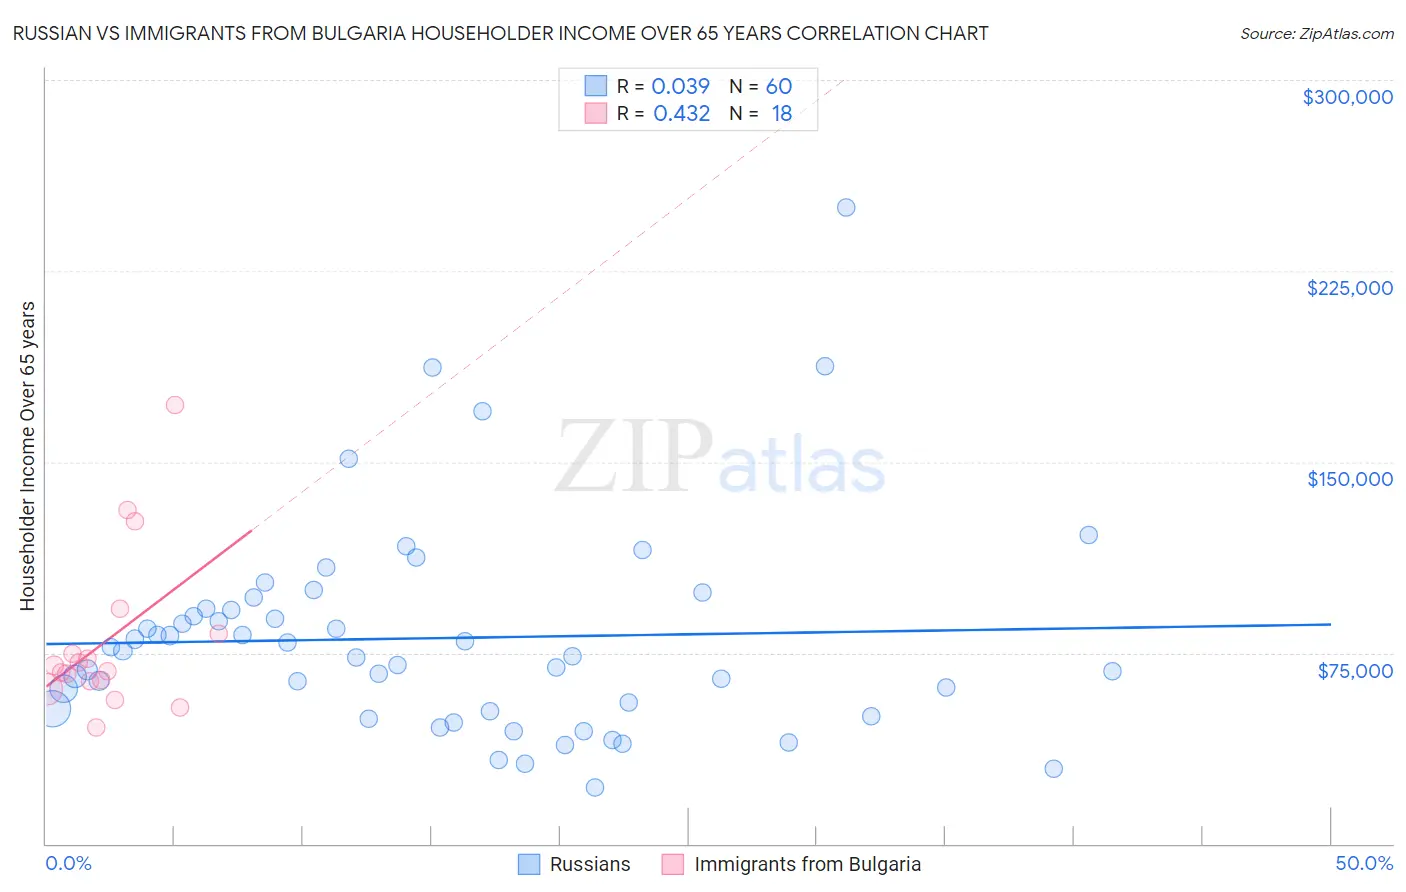 Russian vs Immigrants from Bulgaria Householder Income Over 65 years